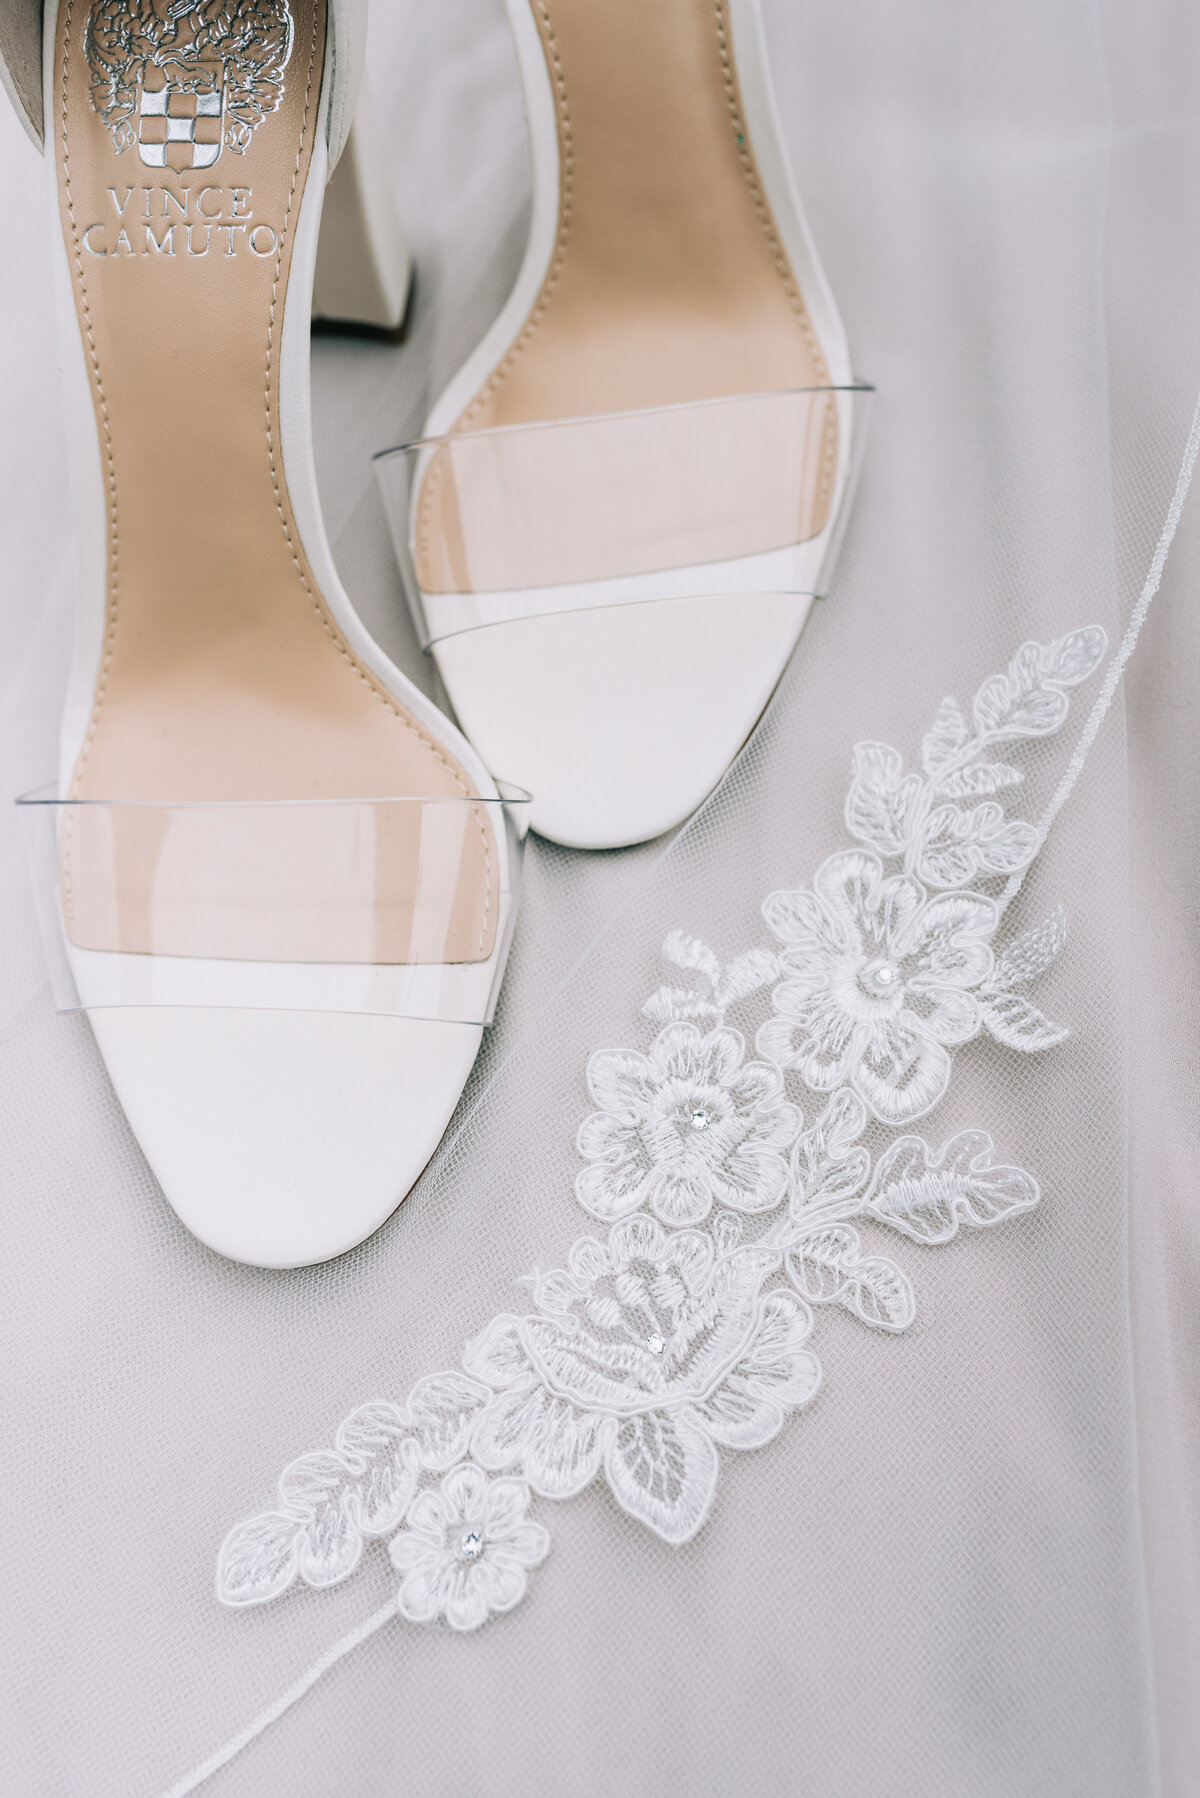 vince camuto wedding shoes